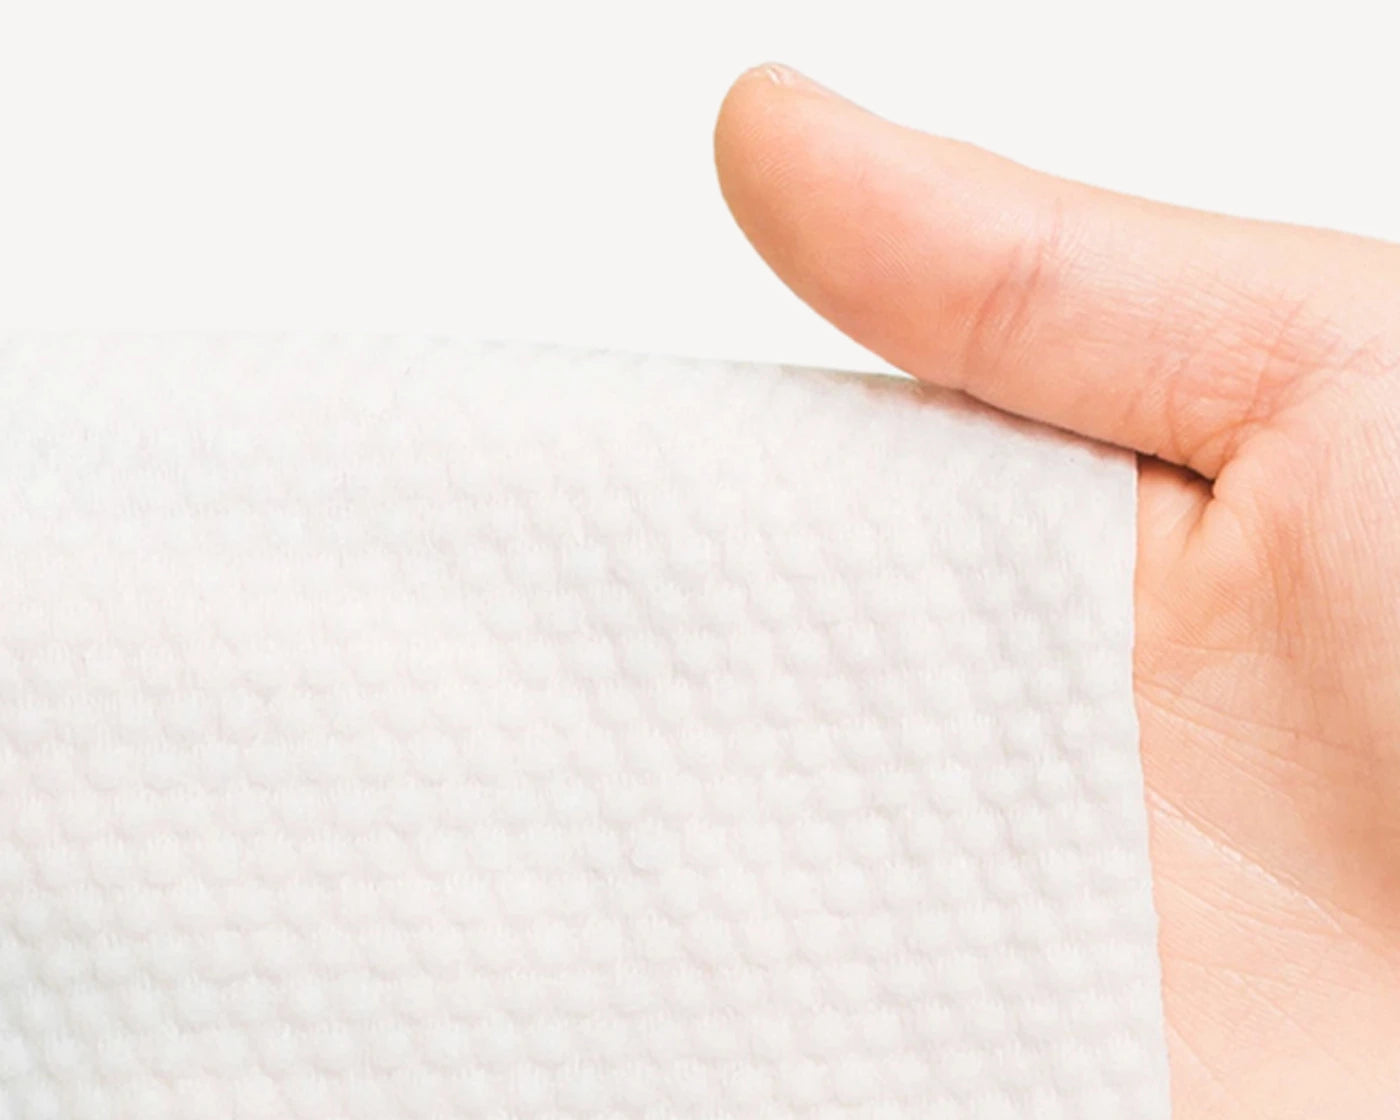 Person holding a textured white kitchen paper towel, demonstrating its thickness and quality.